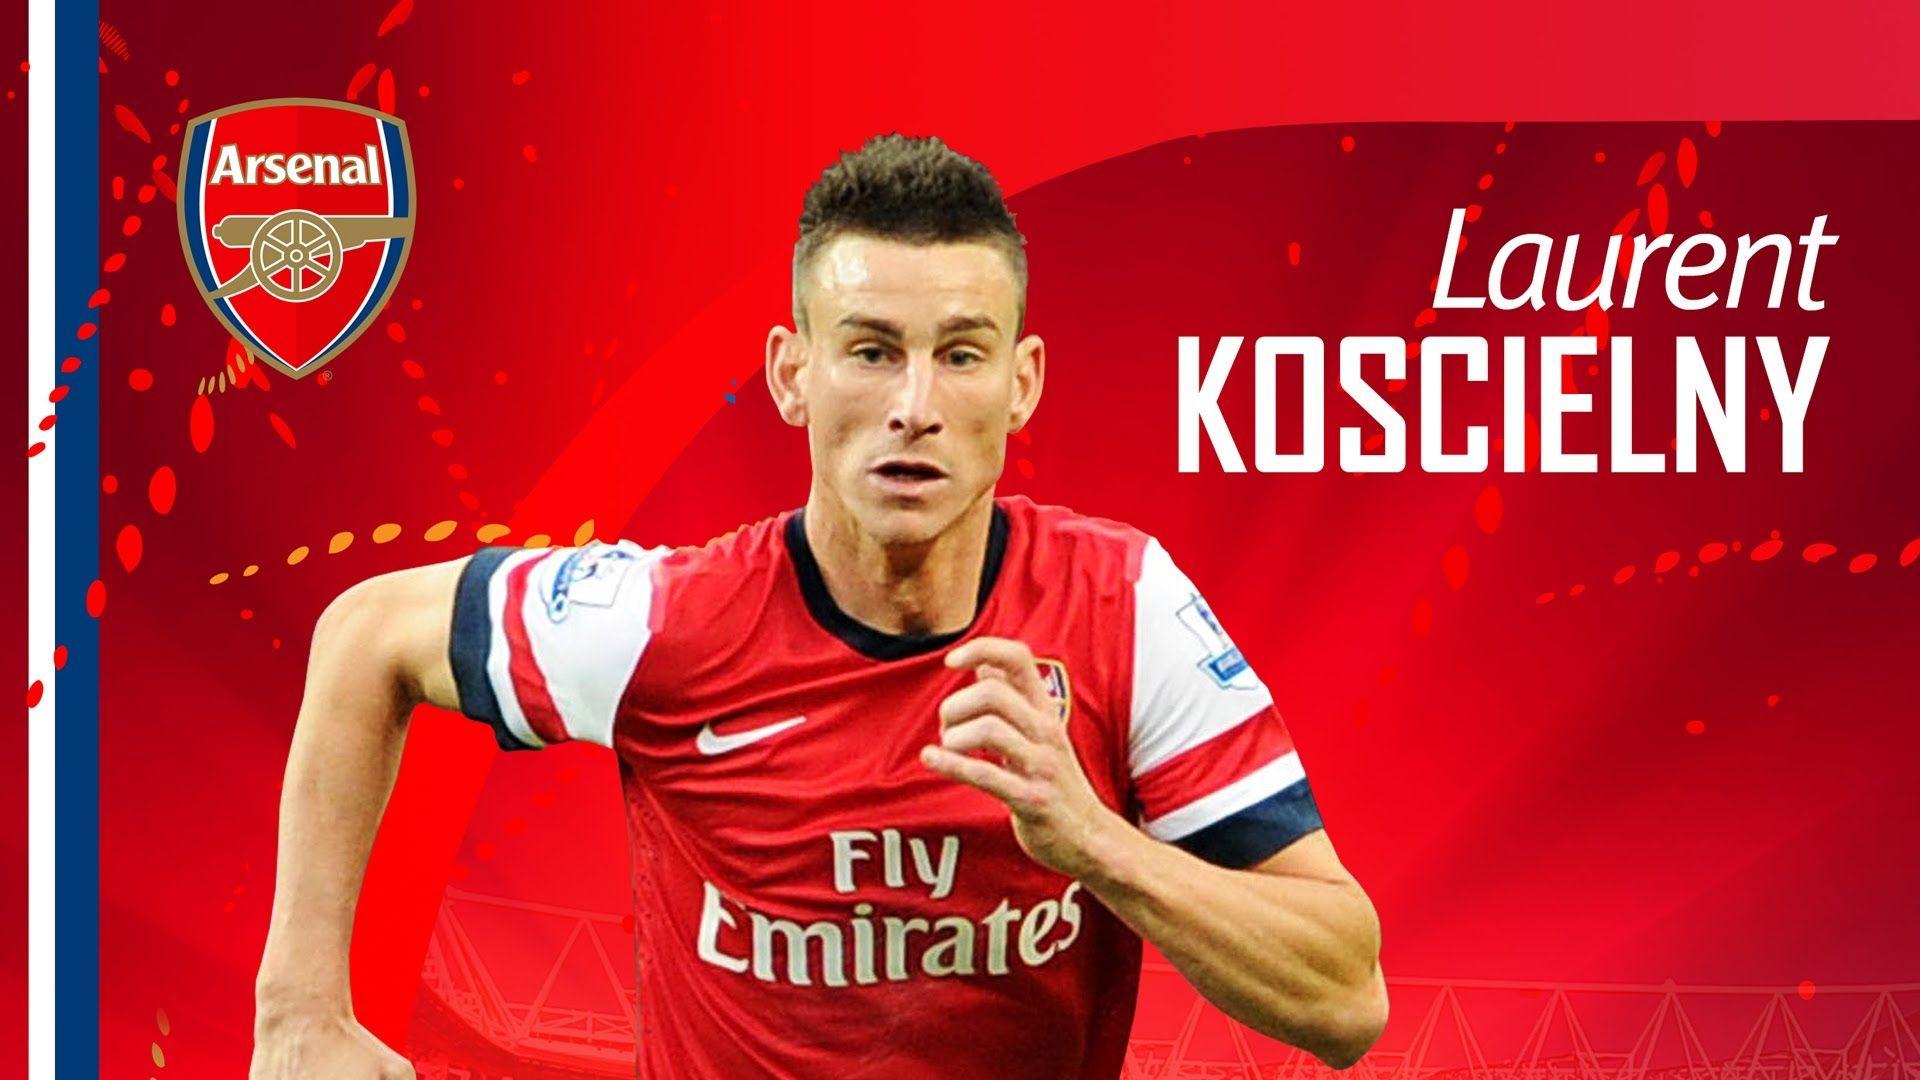 Today Is Laurent Koscielny's 6th Year Anniversary With Arsenal